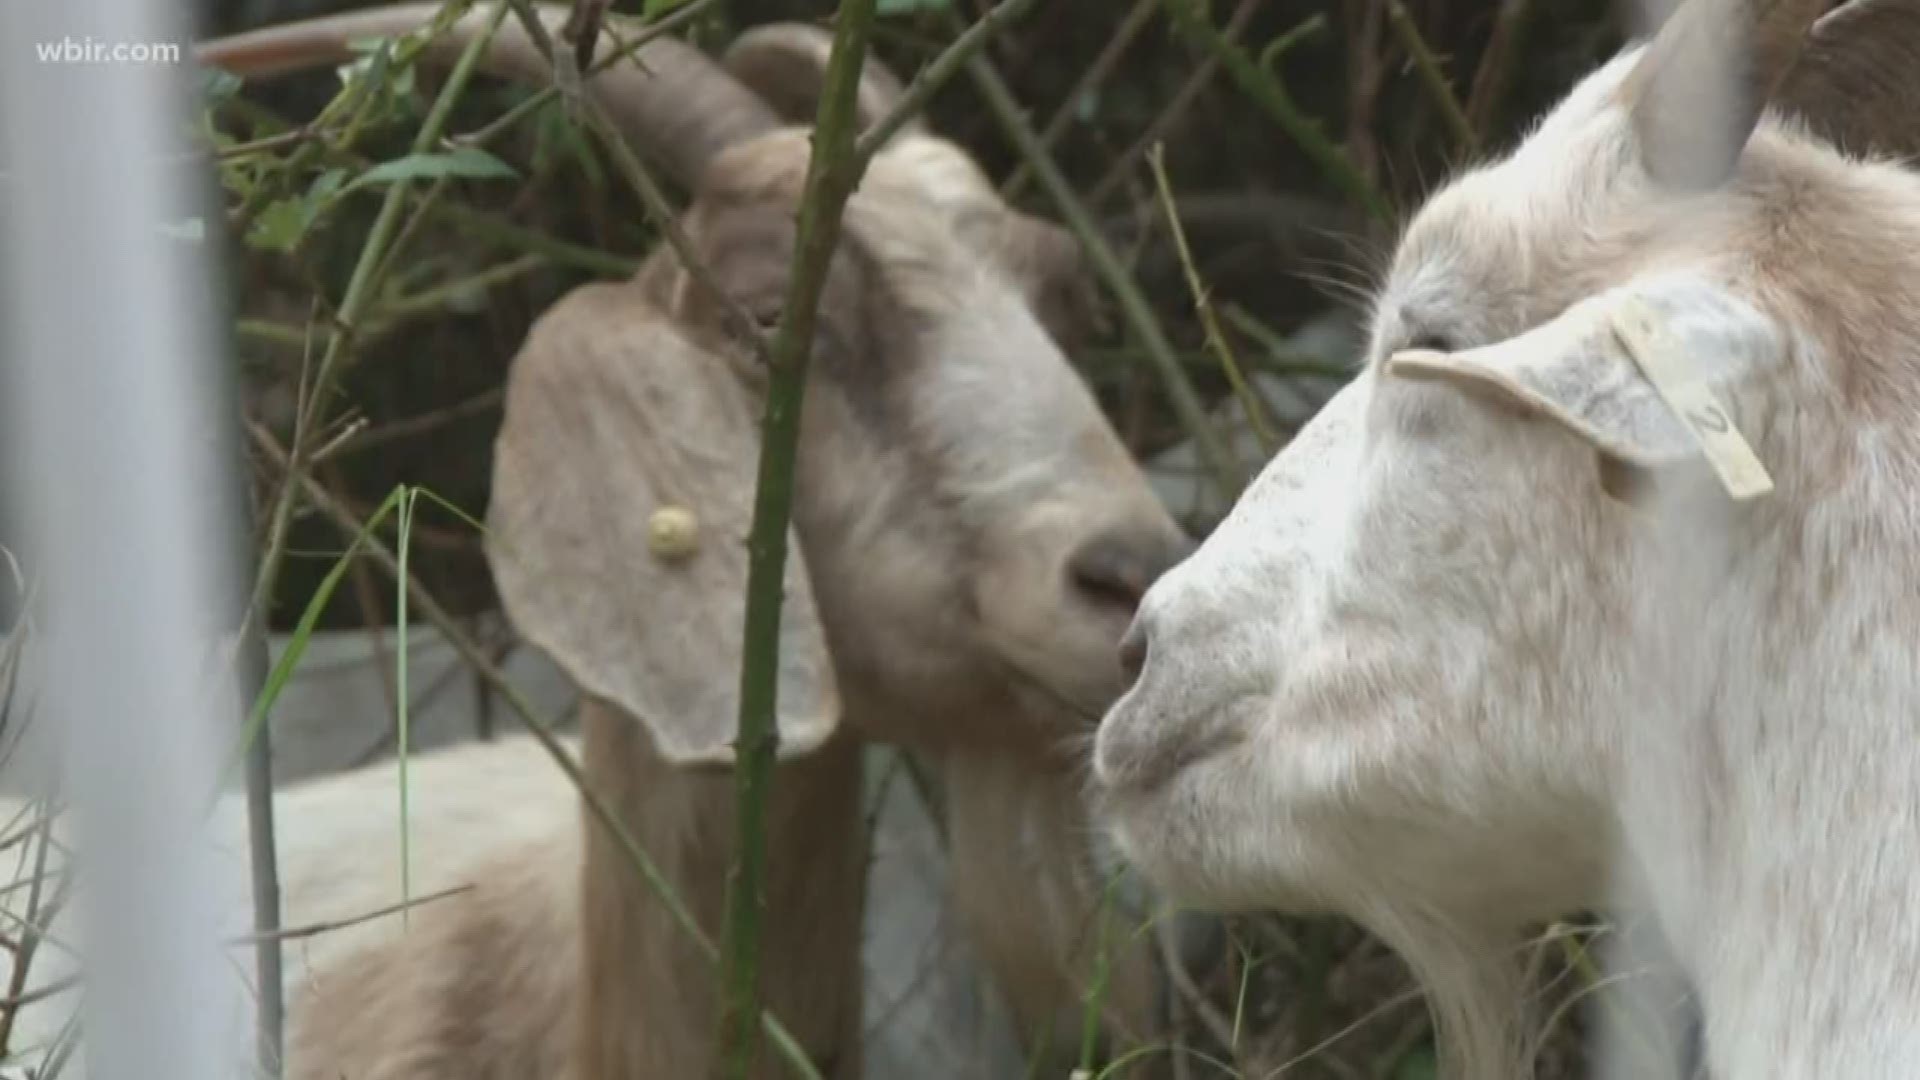 The animals were deployed on campus to help clear out kudzu.